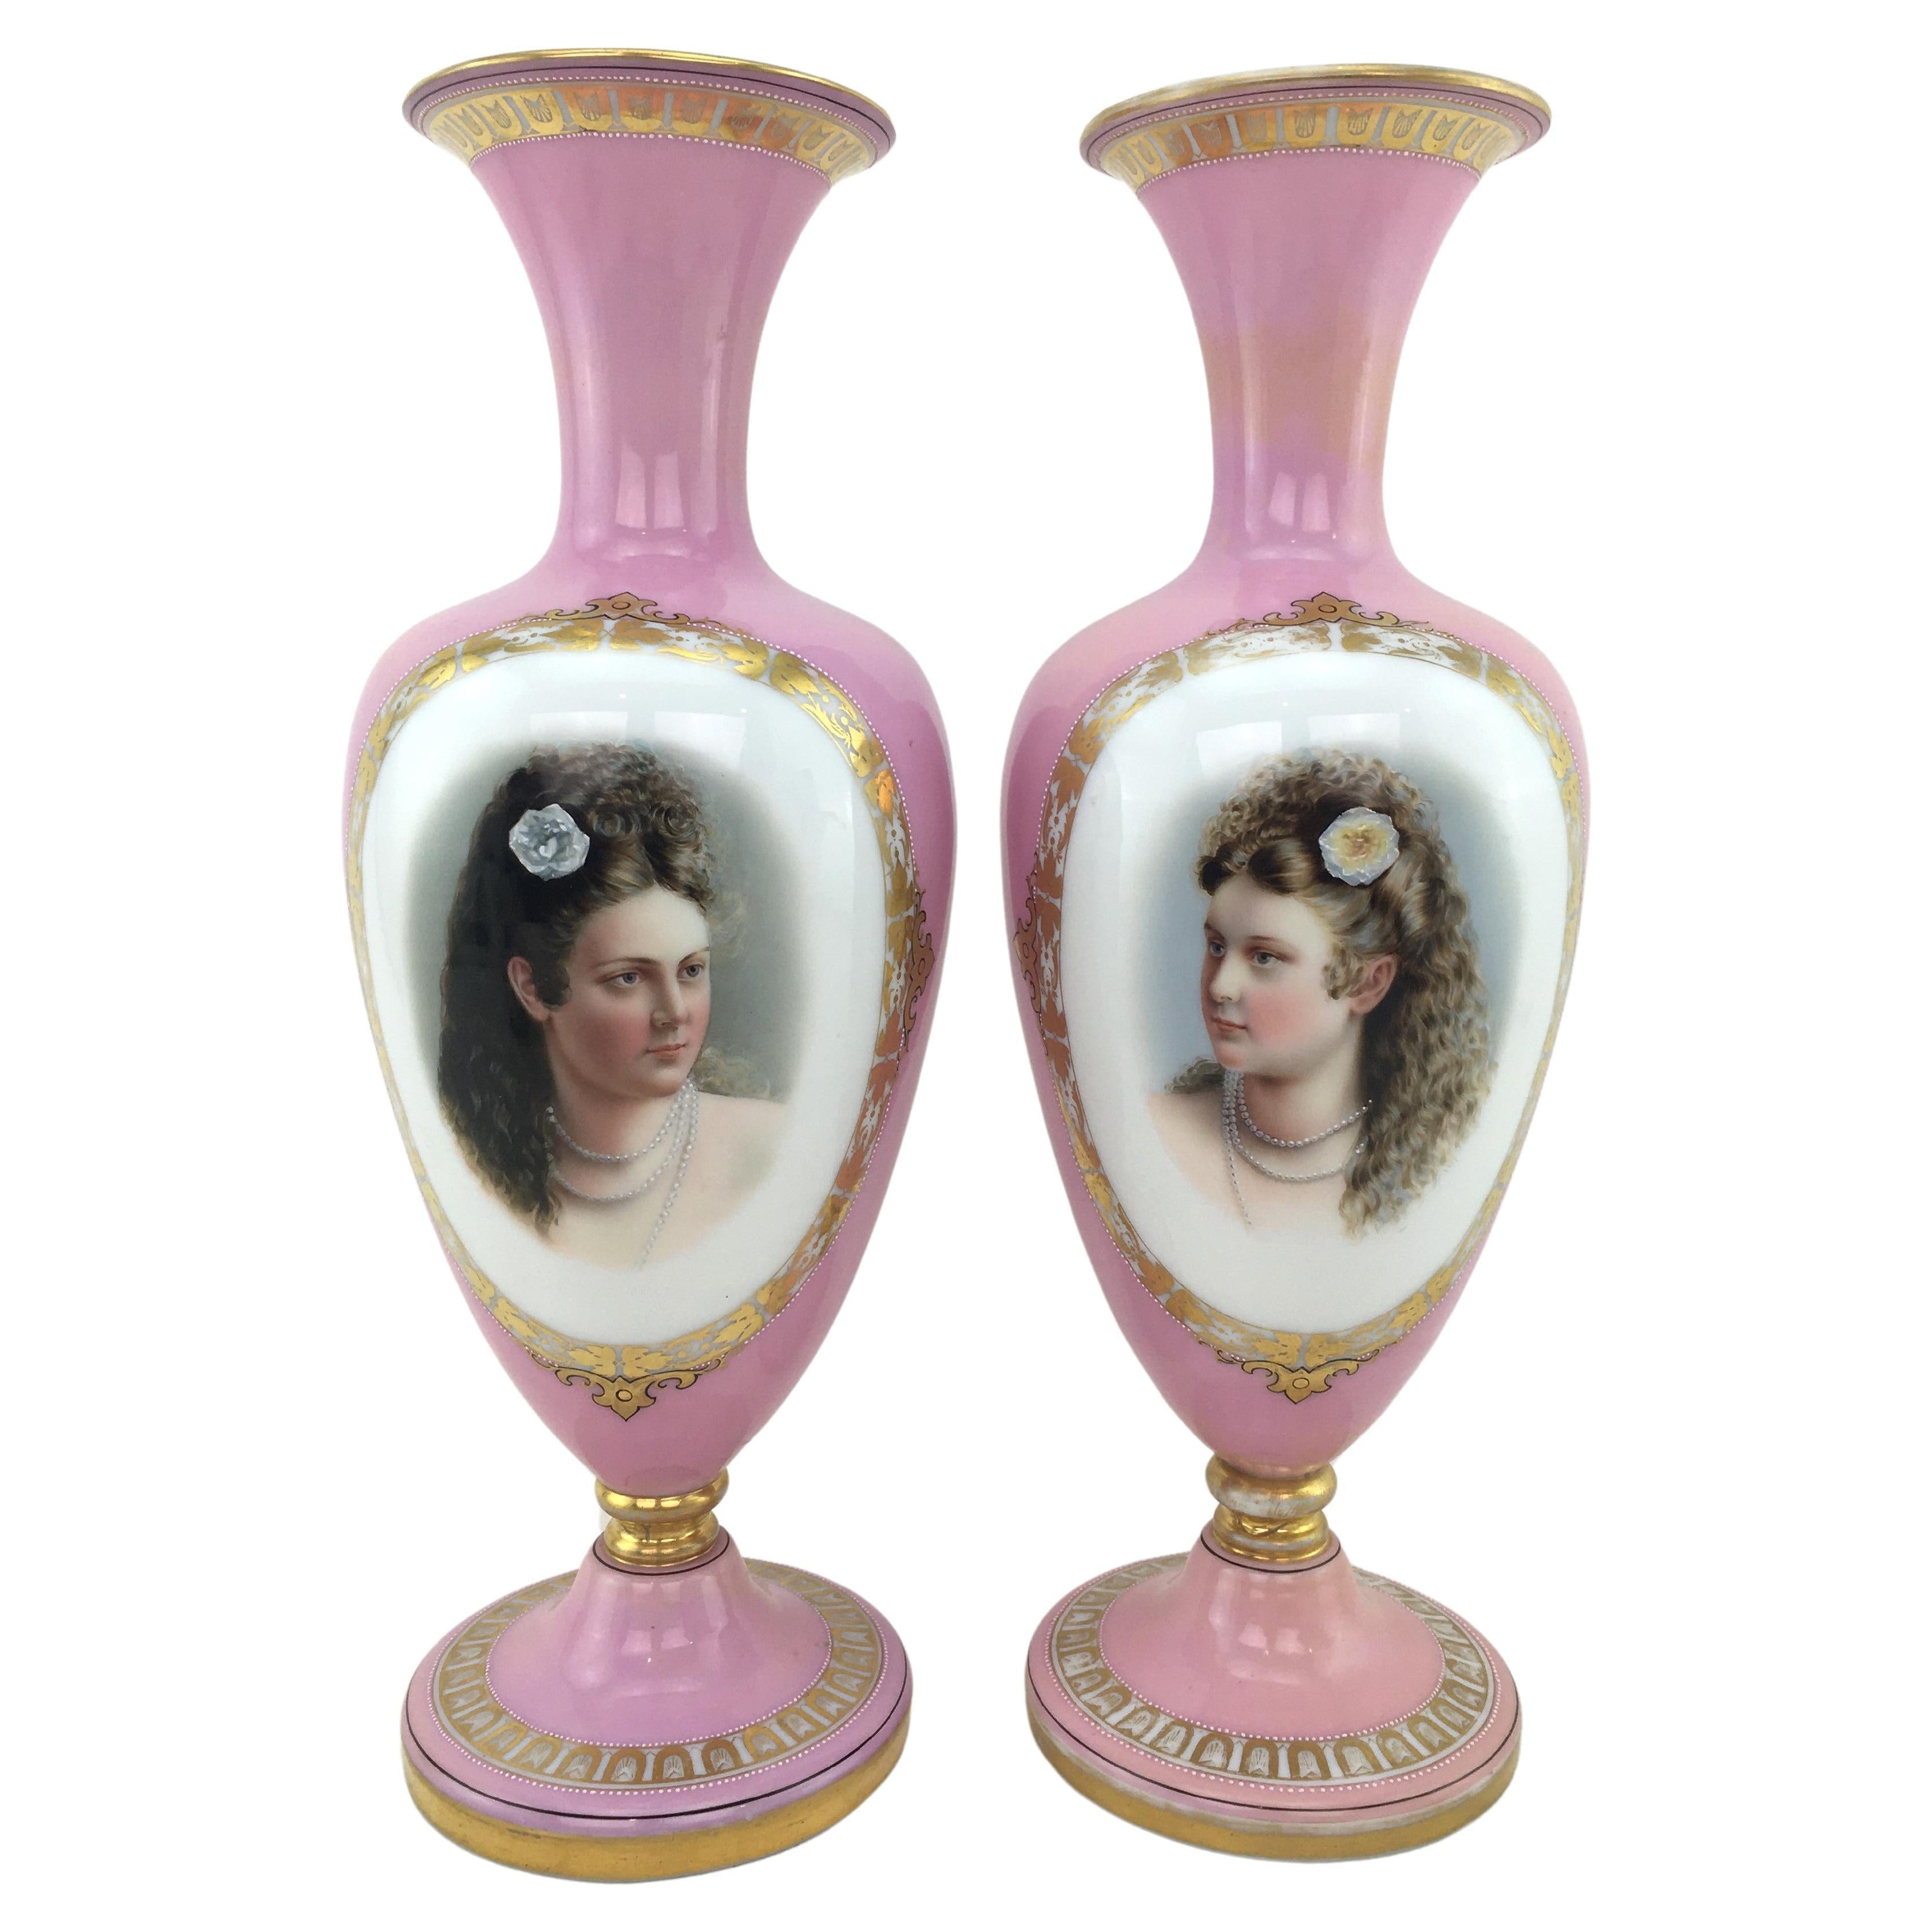 Pair of Large Antique Pink Enameled Glass Portrait Vases with Gilt Accents